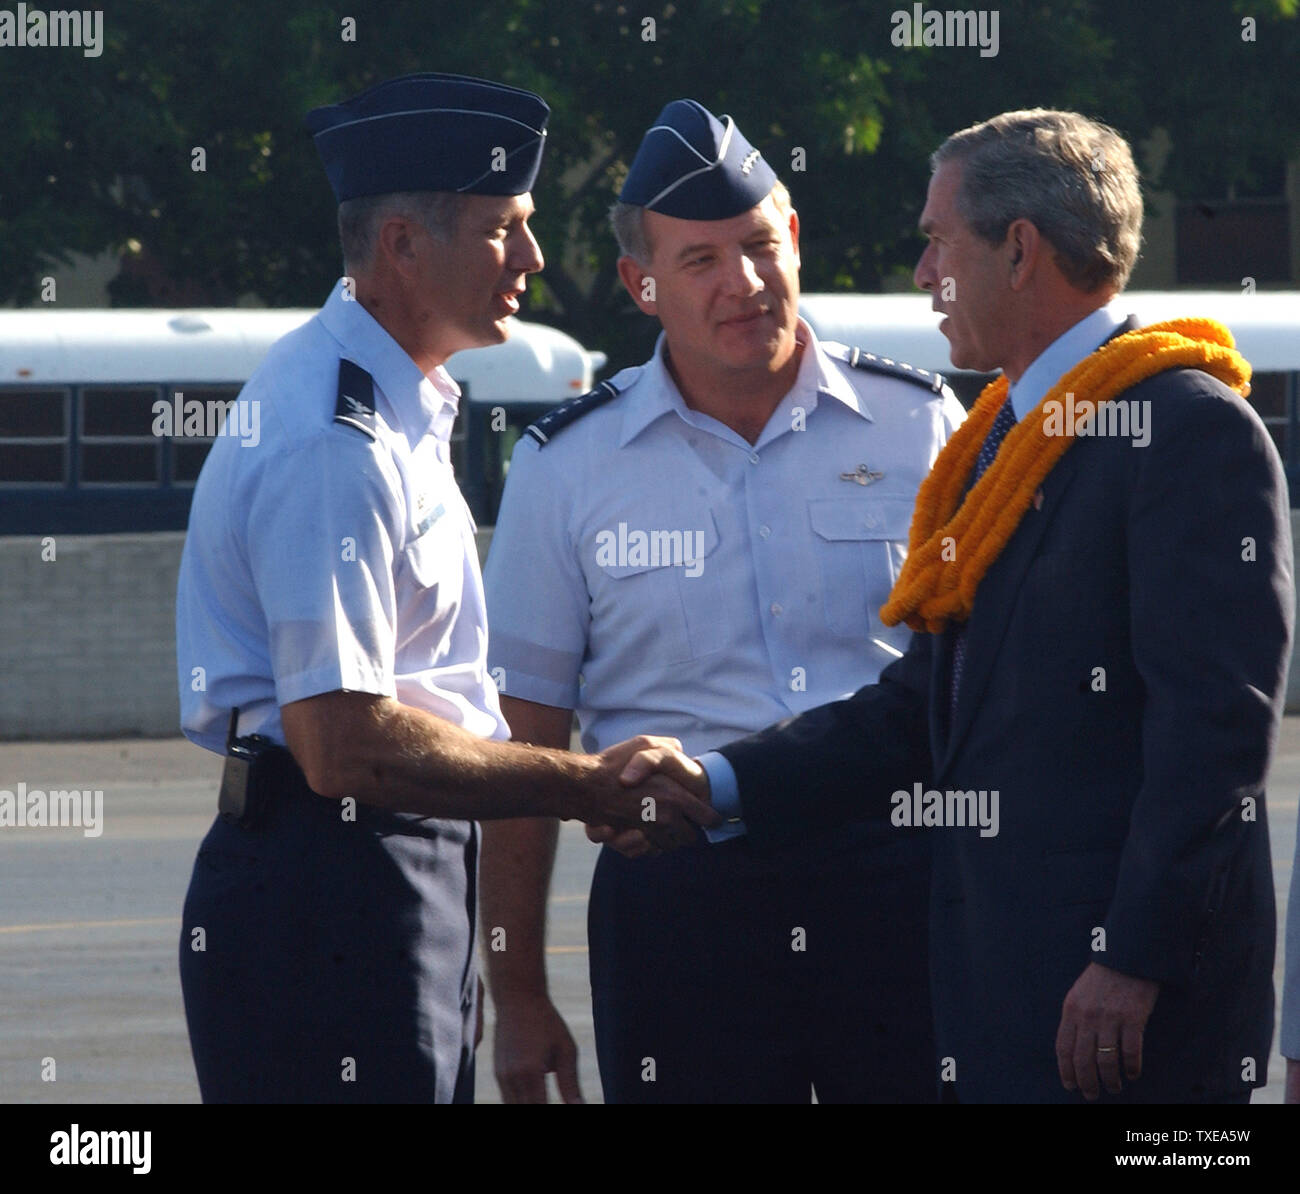 George W. Bush, the 43rd President of the United States, arrives at Hickam Air Force Base, Hawaii, on Oct. 23, 2003.  Col. Raymond G. Torres, the commander of the 15th Airlift Wing, Hickam Air Force Base and Gen. William J. Begert, Commander, Pacific Air Forces, and Air Component Commander for the Commander, U.S. Pacific Command, Hickam Air Force Base, welcomes the President at Base Operations.  (UPI/Mysti Cabasug/AFIE) Stock Photo